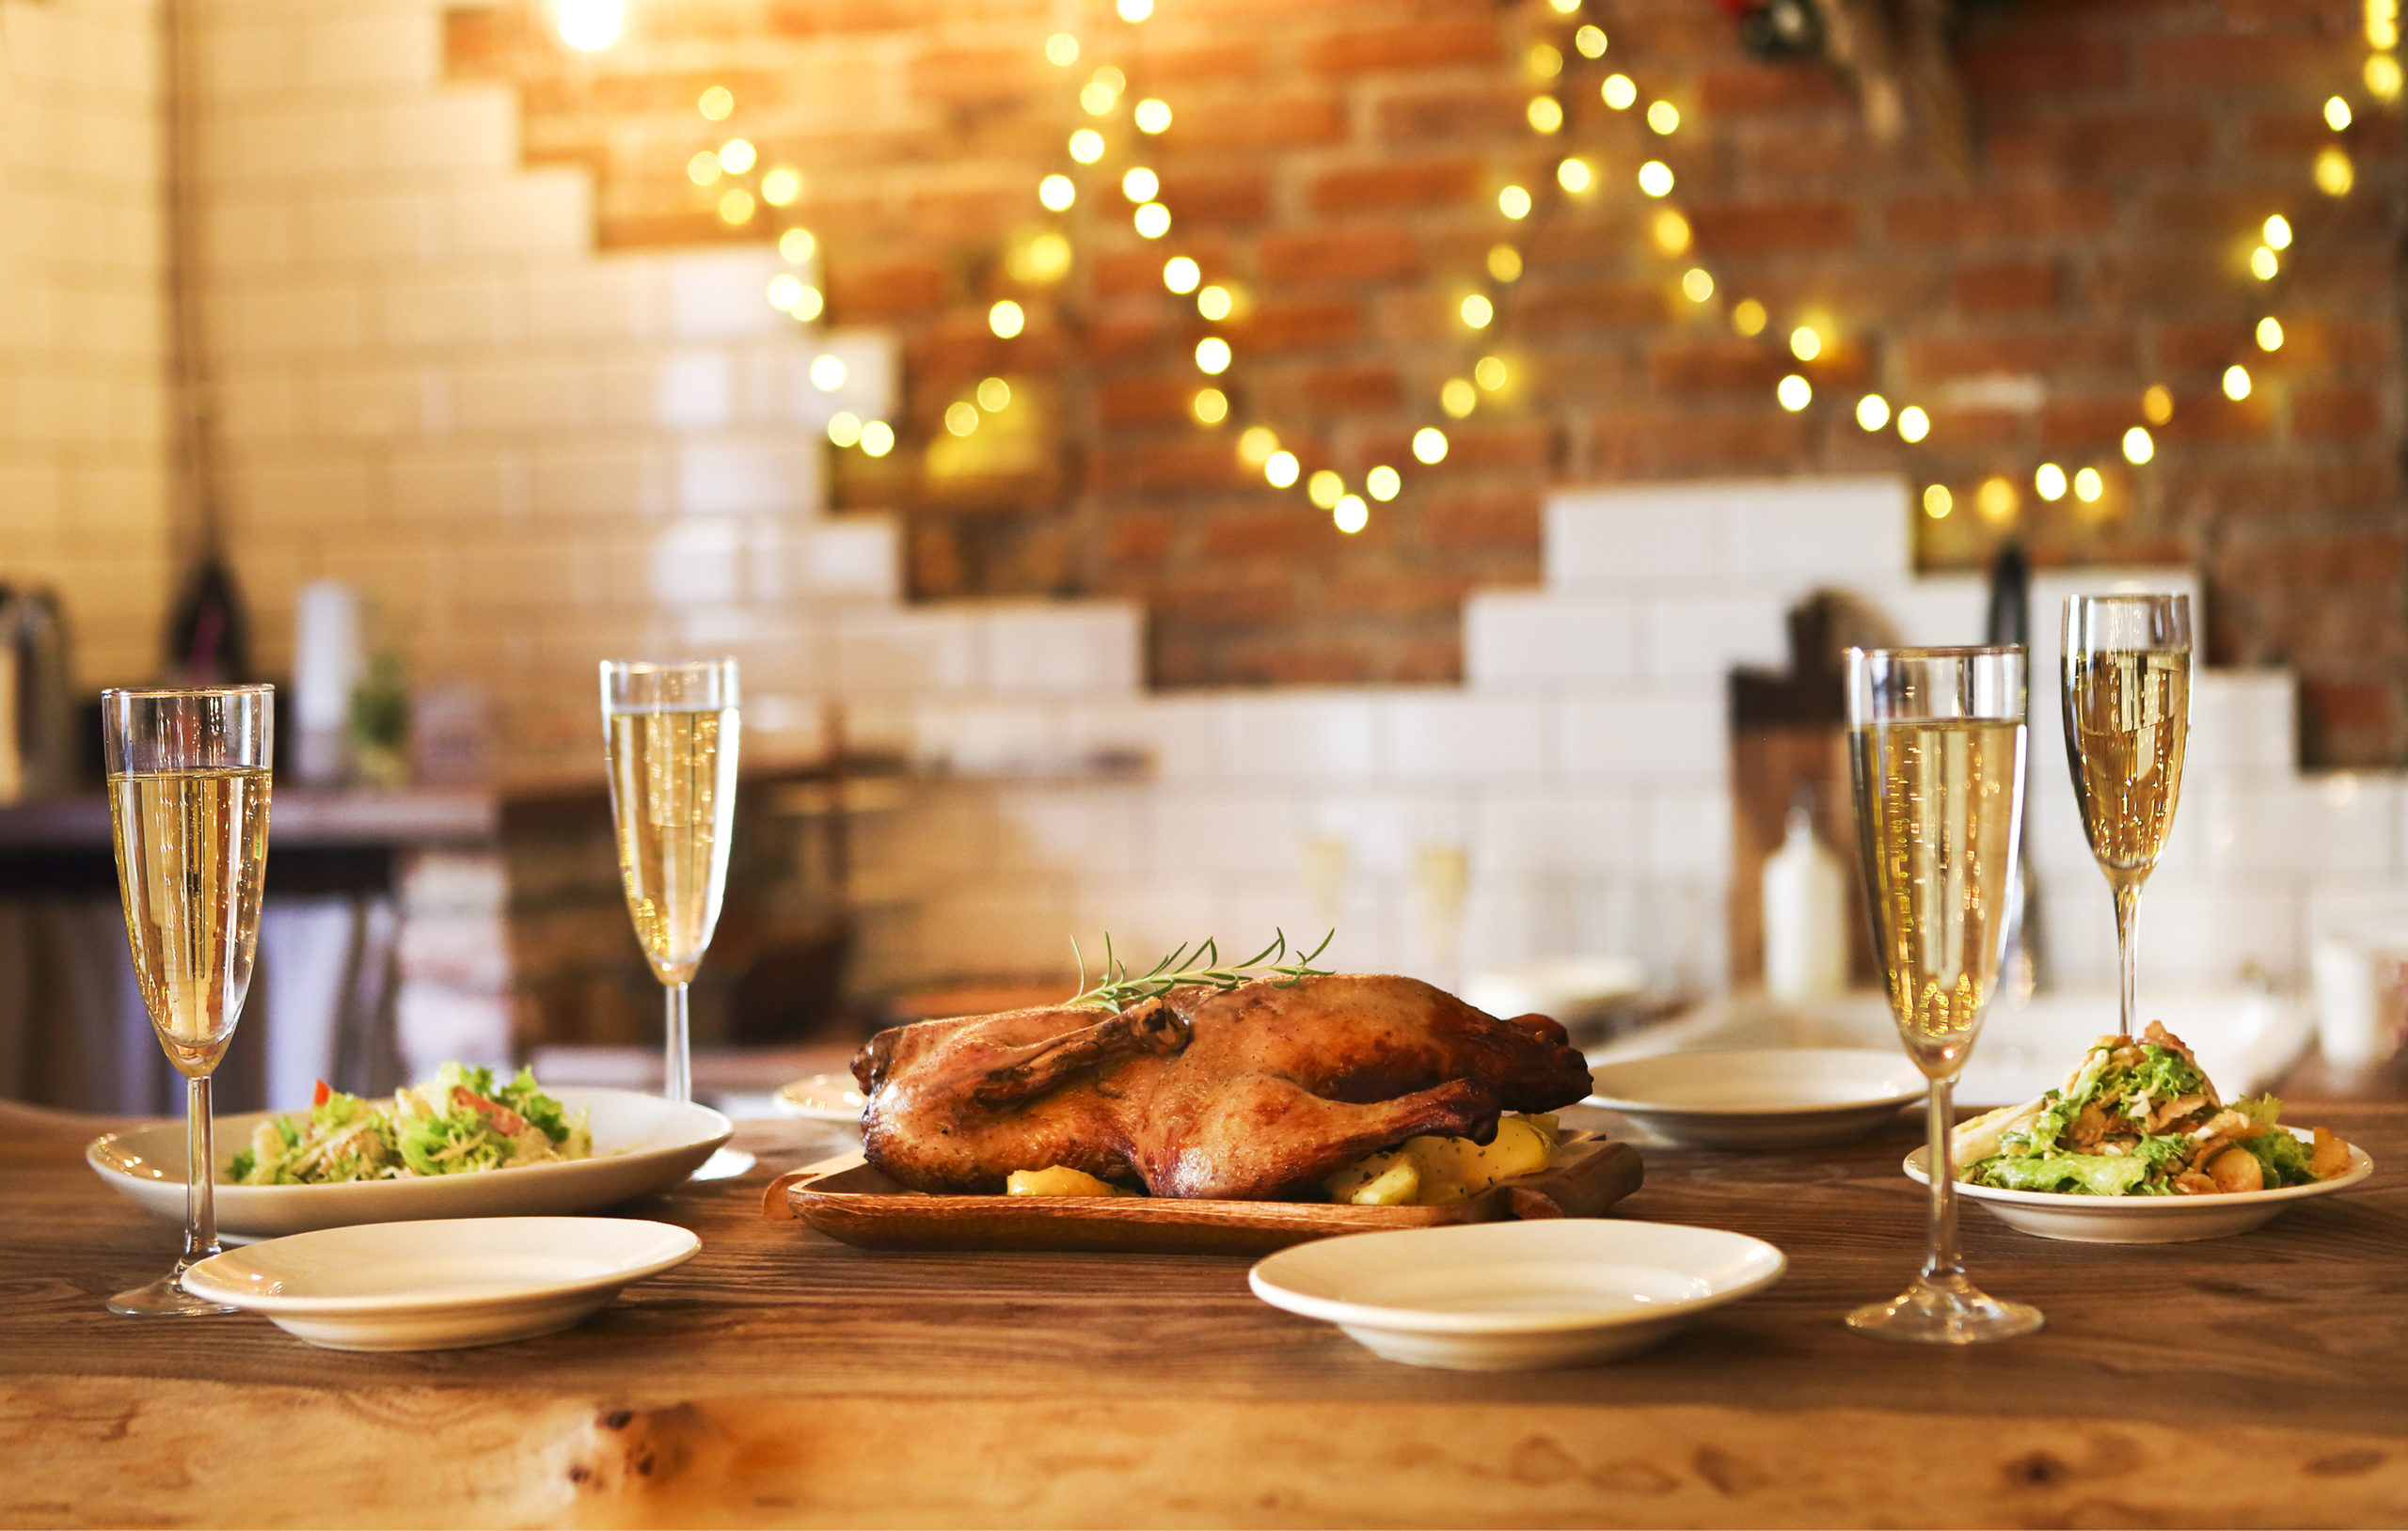 Celebrate with Delicious New Year's Eve Food in Frisco